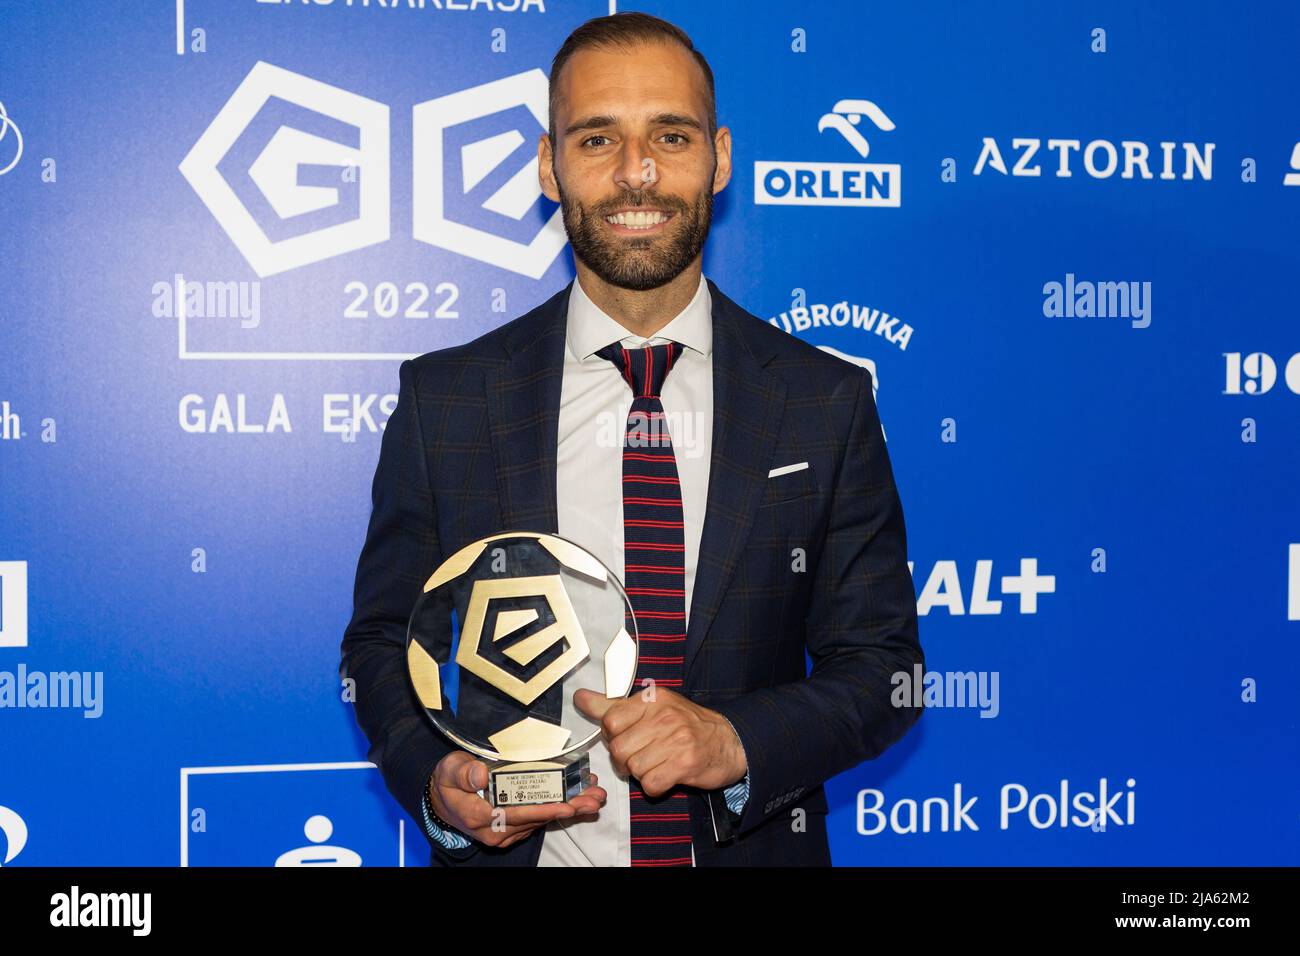 Warsaw, Poland. 23rd May, 2022. Flavio Paixao of Lechia Gdansk with award for the Number of the season 2021/22 seen during Gala of Ekstraklasa 2022 in Warsaw. Credit: SOPA Images Limited/Alamy Live News Stock Photo